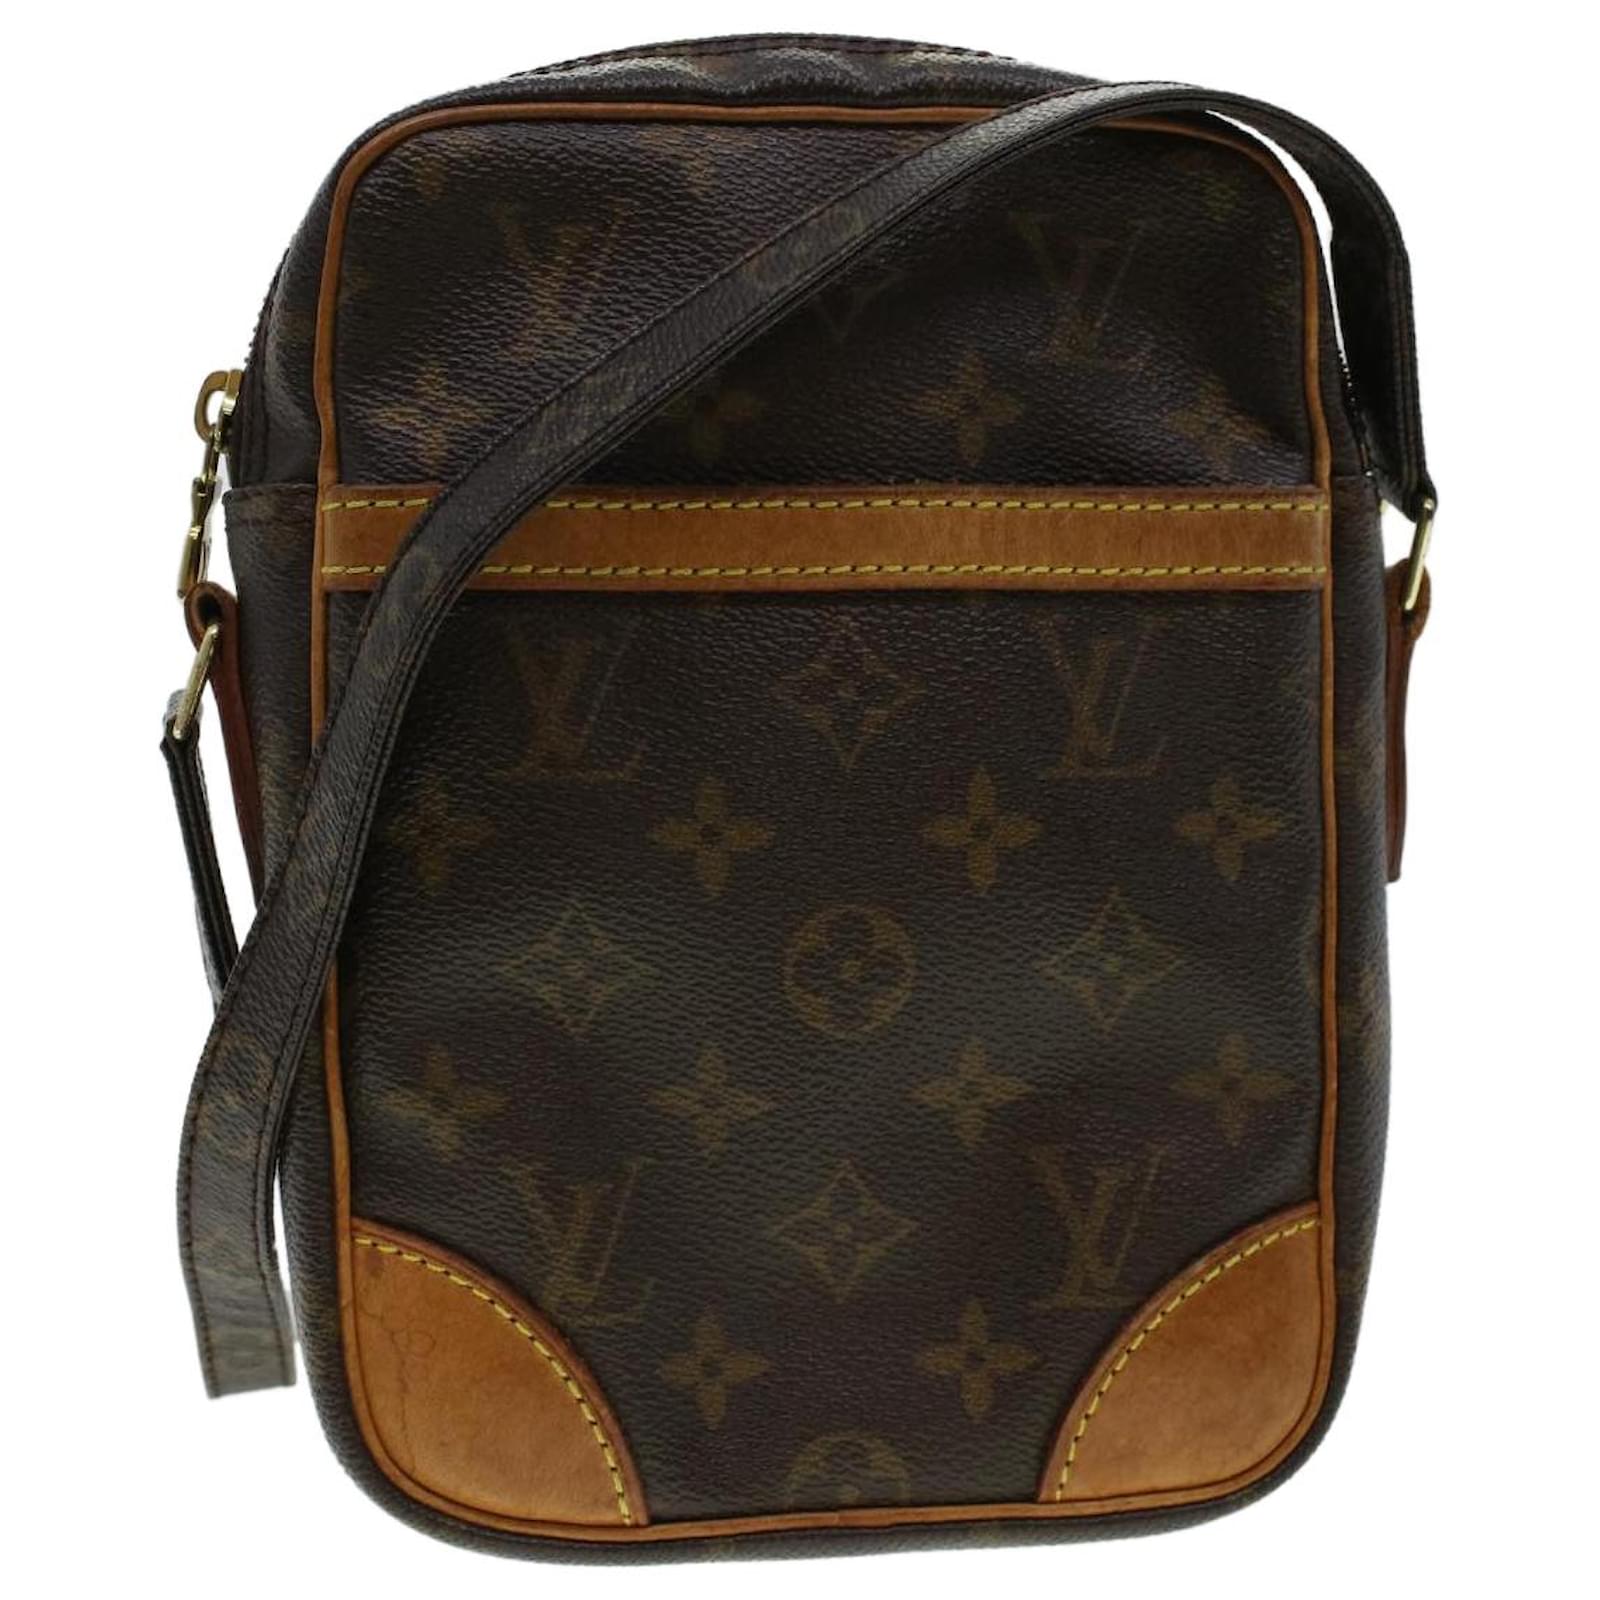 Shop for Louis Vuitton Monogram Canvas Leather Danube Crossbody Bag -  Shipped from USA